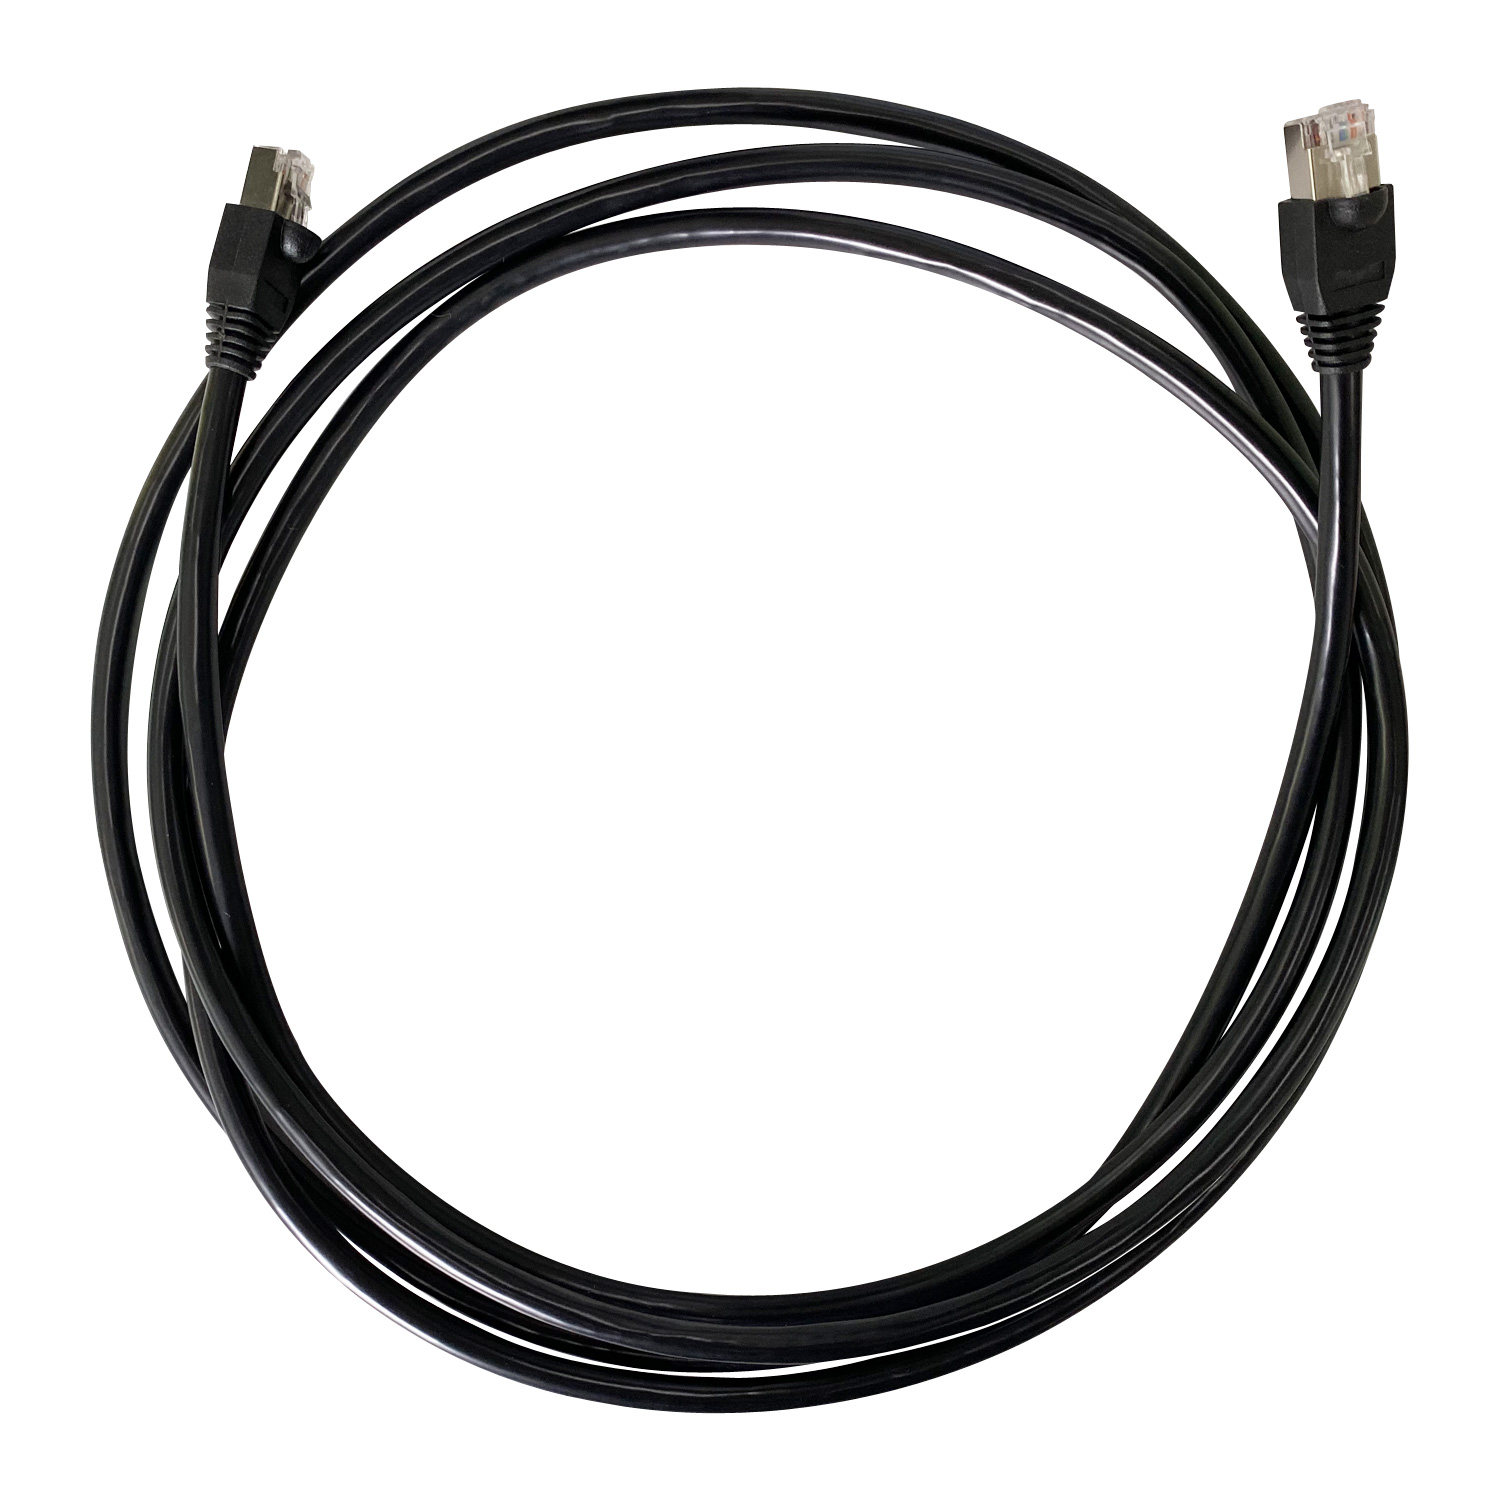 CAT5e Networking Cable Assembly UTP FTP na may RJ45 Connector